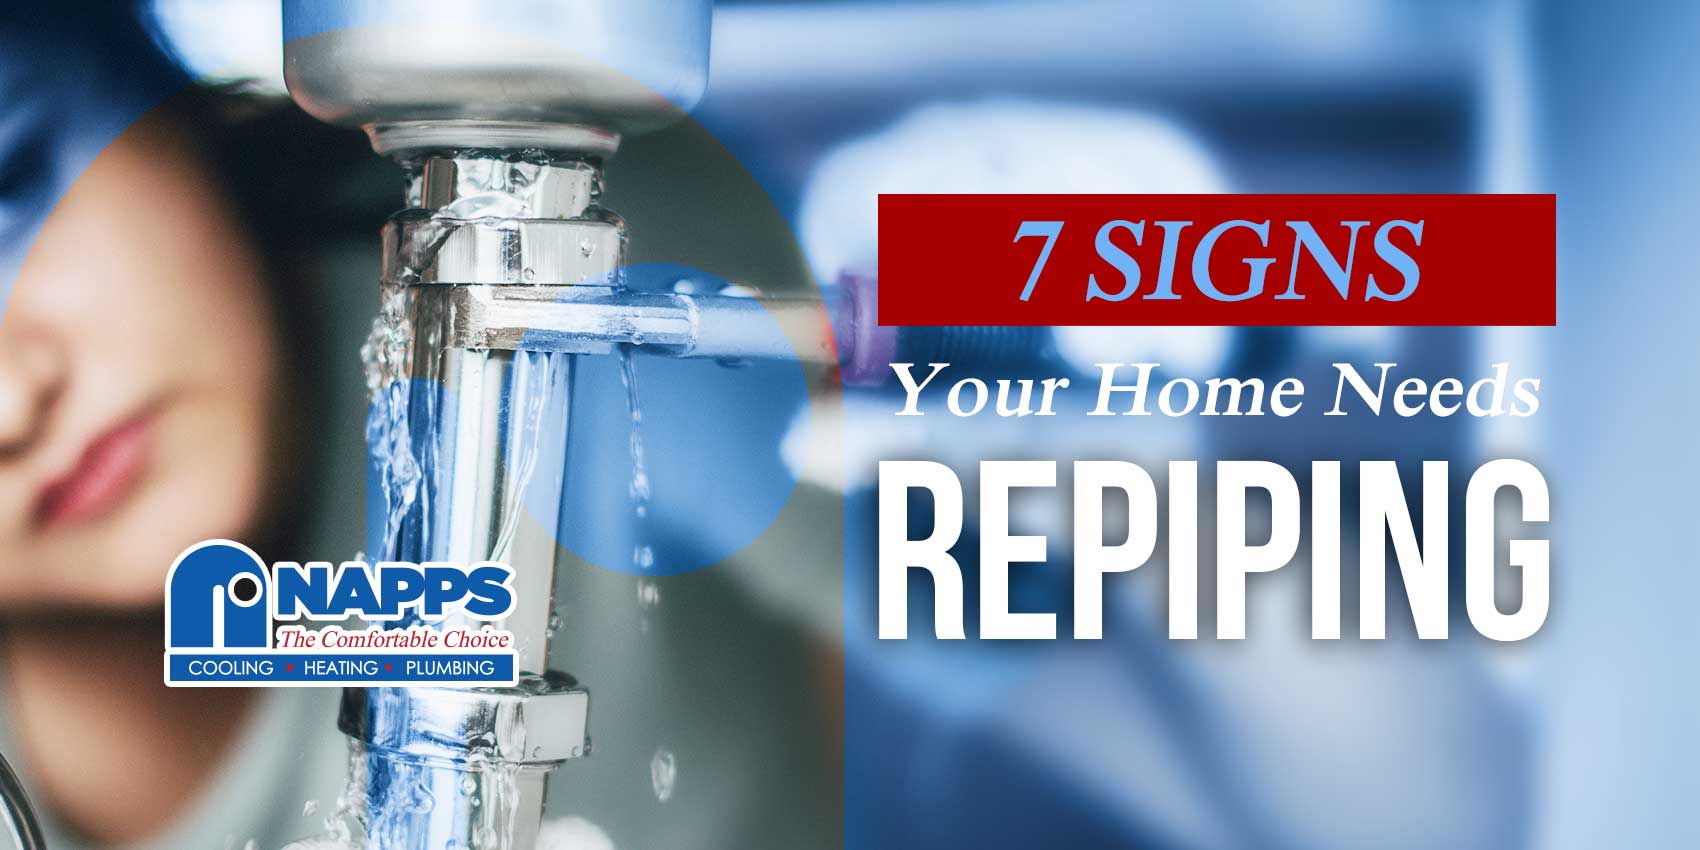 7 Signs Your Home Needs Repiping